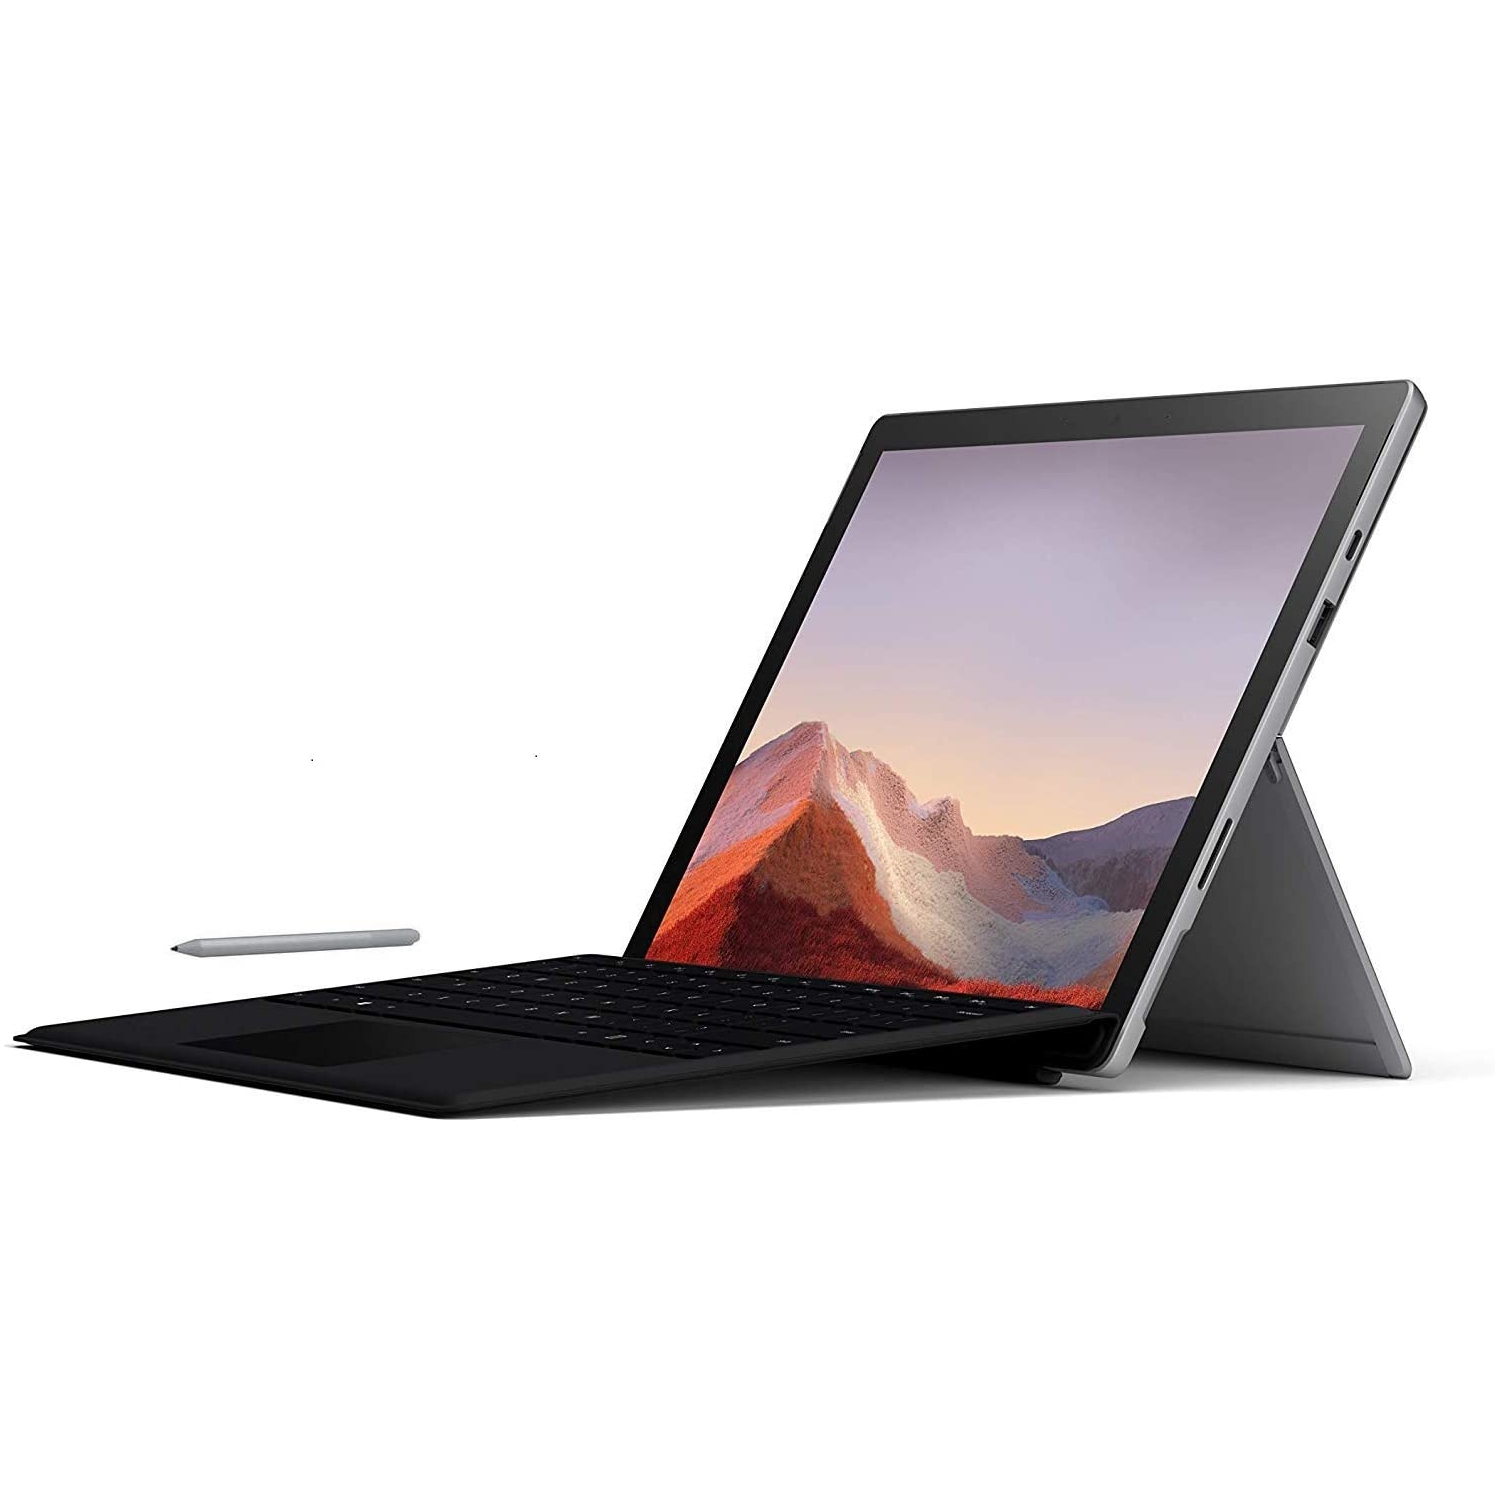 Open Box - Microsoft Surface Pro 7 Bundle: 10th Gen Intel Core i5-1035G4, 8GB RAM, 128GB SSD – Platinum with Black Type Cover and Surface Pen, 12.3" Touchscreen